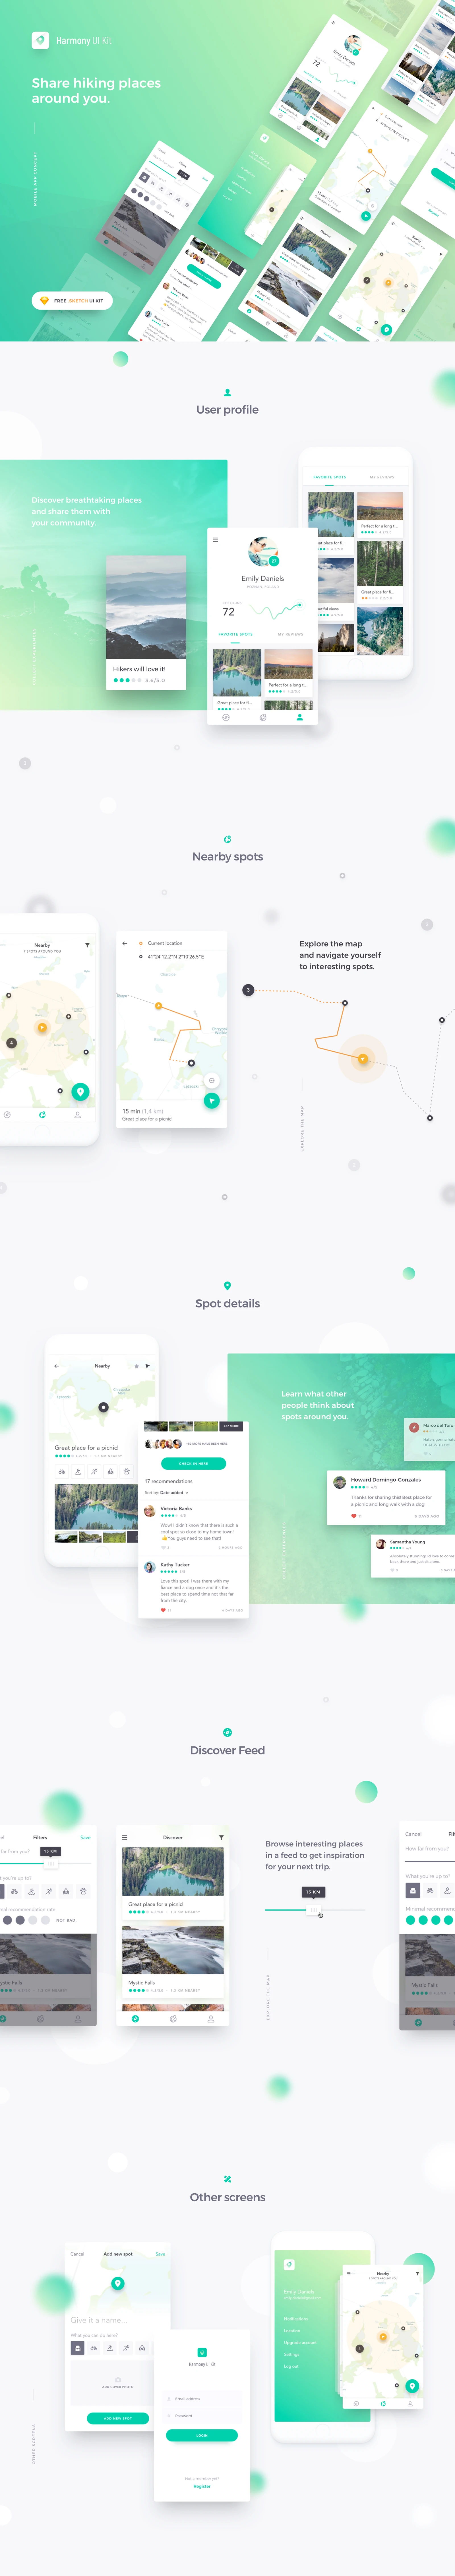 Harmony UI Kit for Sketch - Location-oriented mobile app concept to find, share and rate hiking places around you